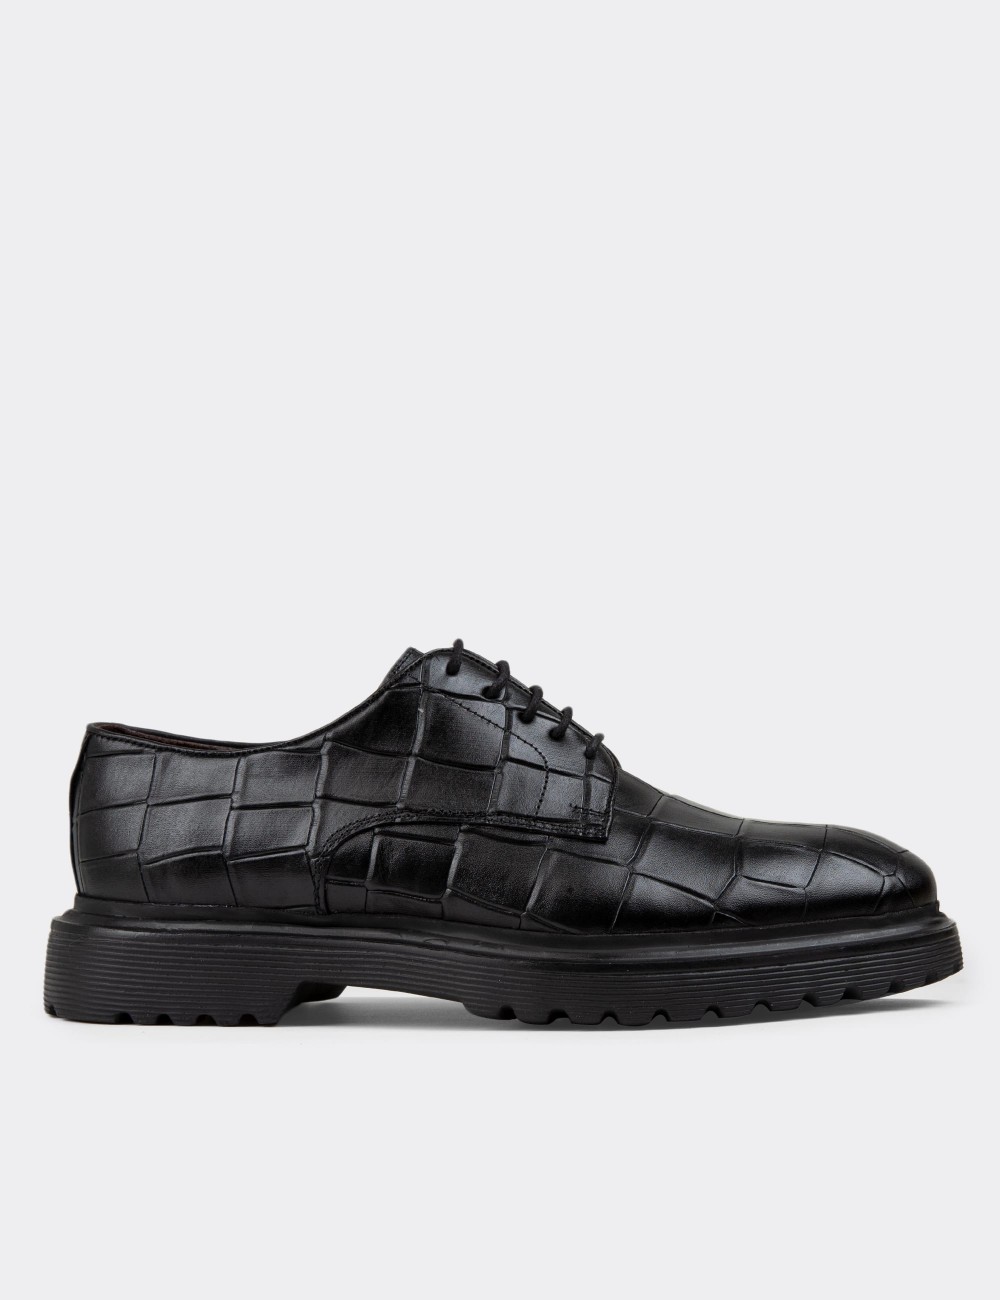 Black Leather Lace-up Shoes - 01854MSYHE03